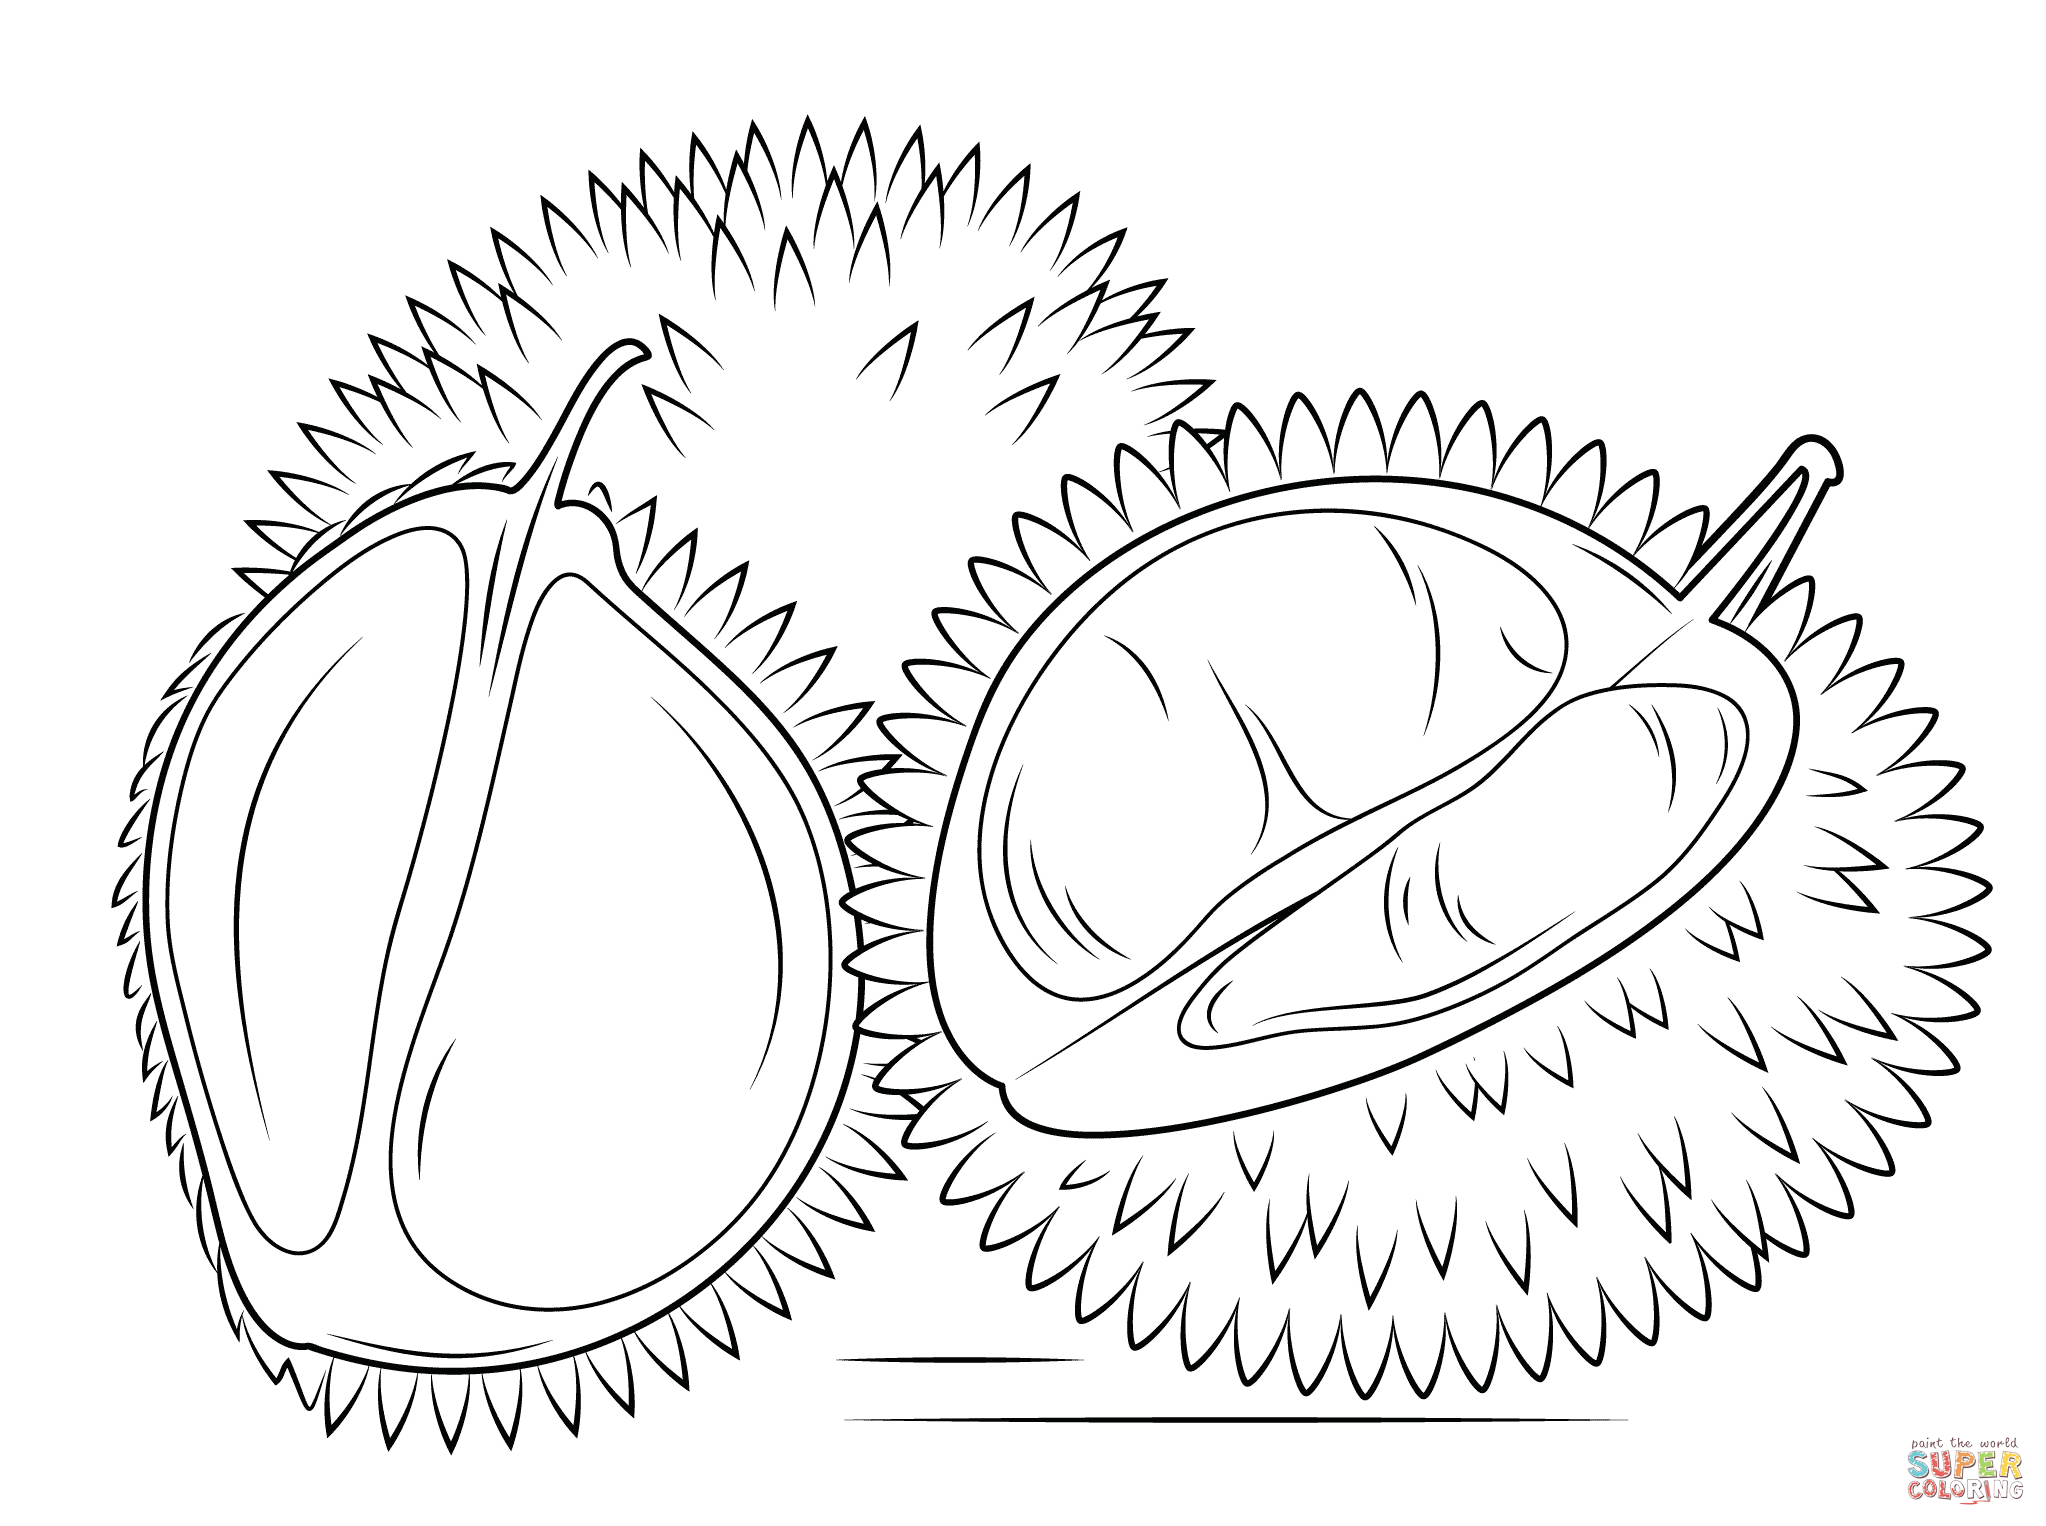 Whole apricot and apricot sliced in half coloring page